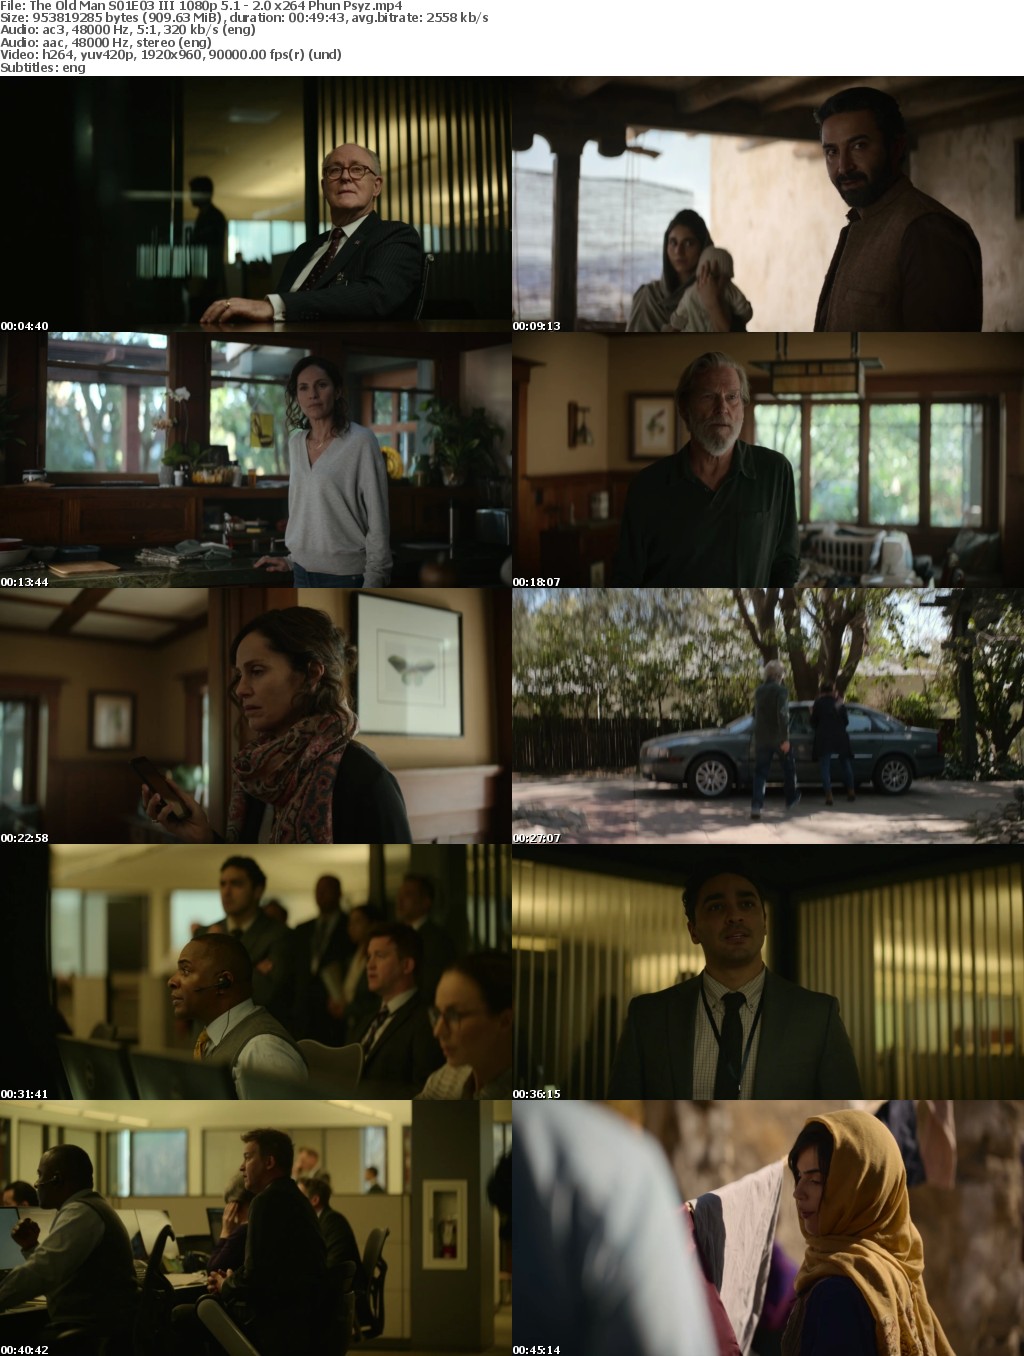 The Old Man S01E03 III 1080p 5 1 - 2 0 x264 Phun Psyz